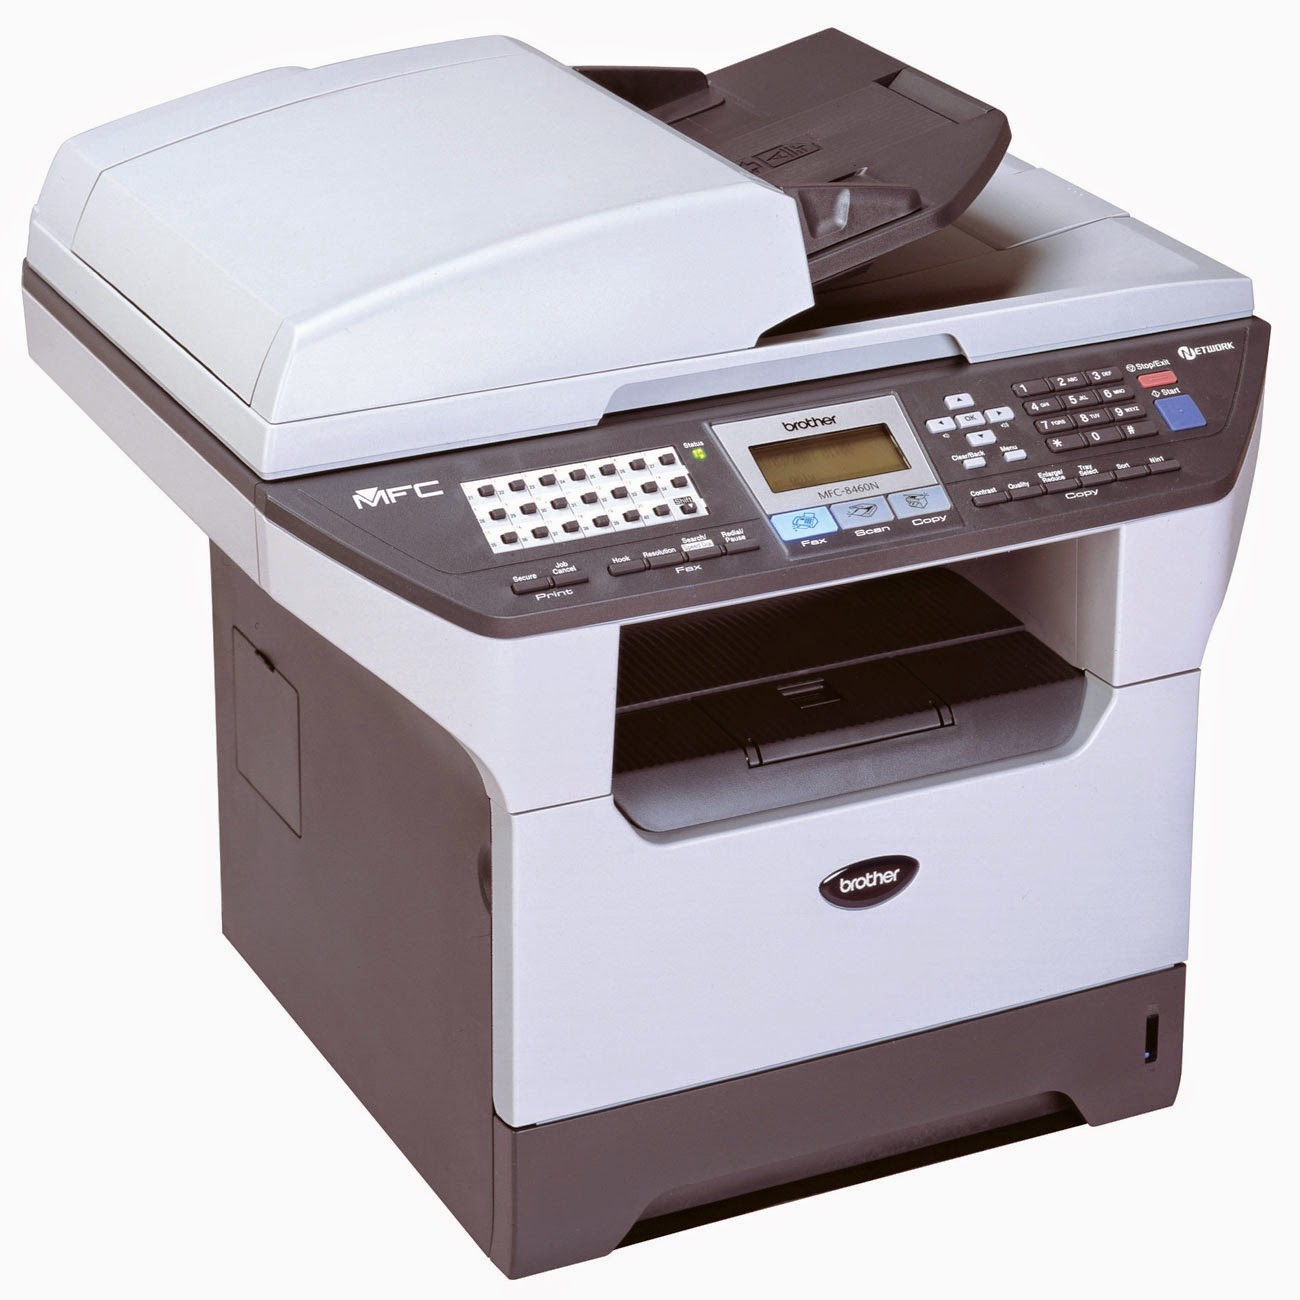 Brother Mfc J435W Printer Driver Download - Brother Mfc J435W Printer Driver Download - 350 Brother ... / Download the latest version of the brother mfc j435w driver for your computer's operating system.